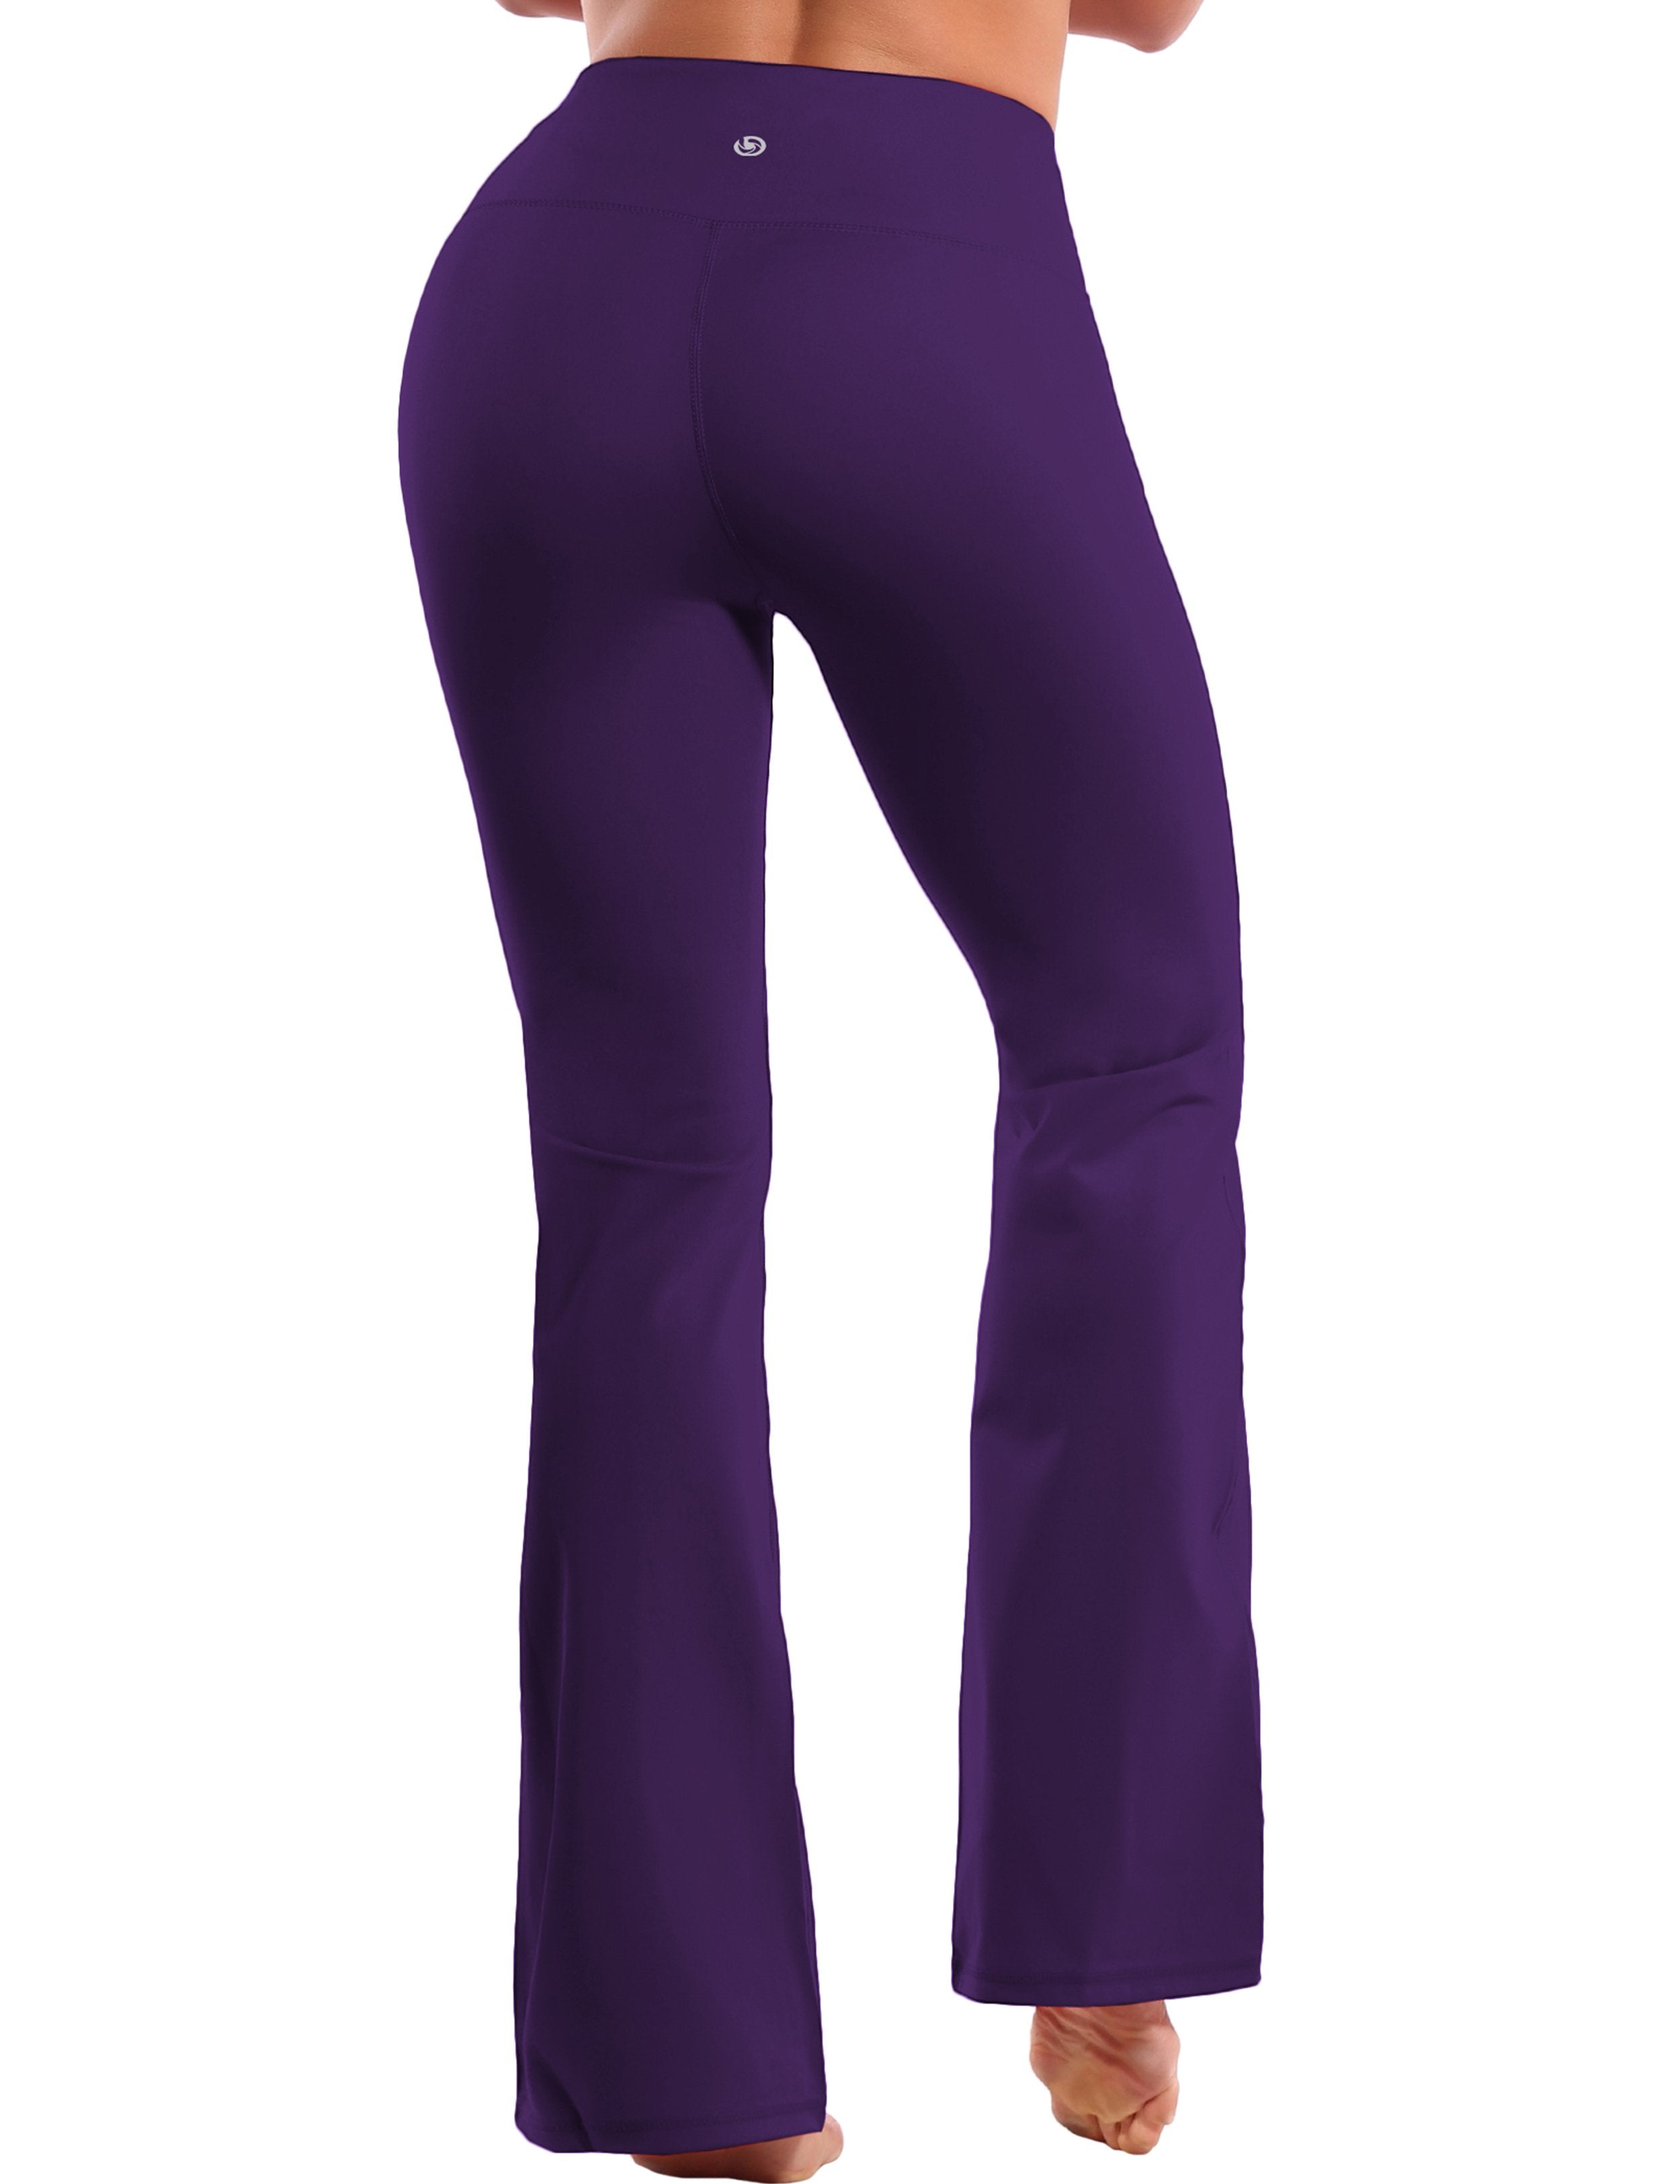 High Waist Bootcut Leggings Eggplantpurple 75%Nylon/25%Spandex Fabric doesn't attract lint easily 4-way stretch No see-through Moisture-wicking Tummy control Inner pocket Five lengths